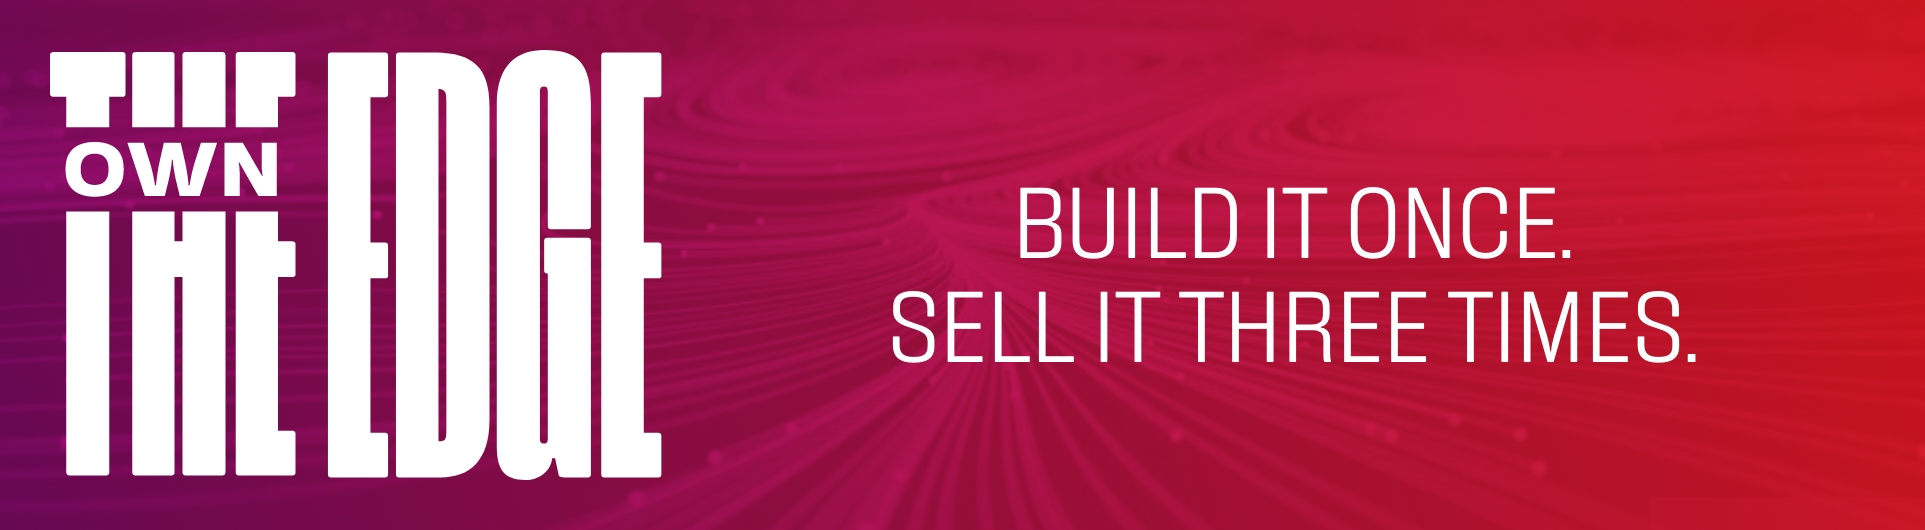 Own the Edge - Build it once. Sell it three times.